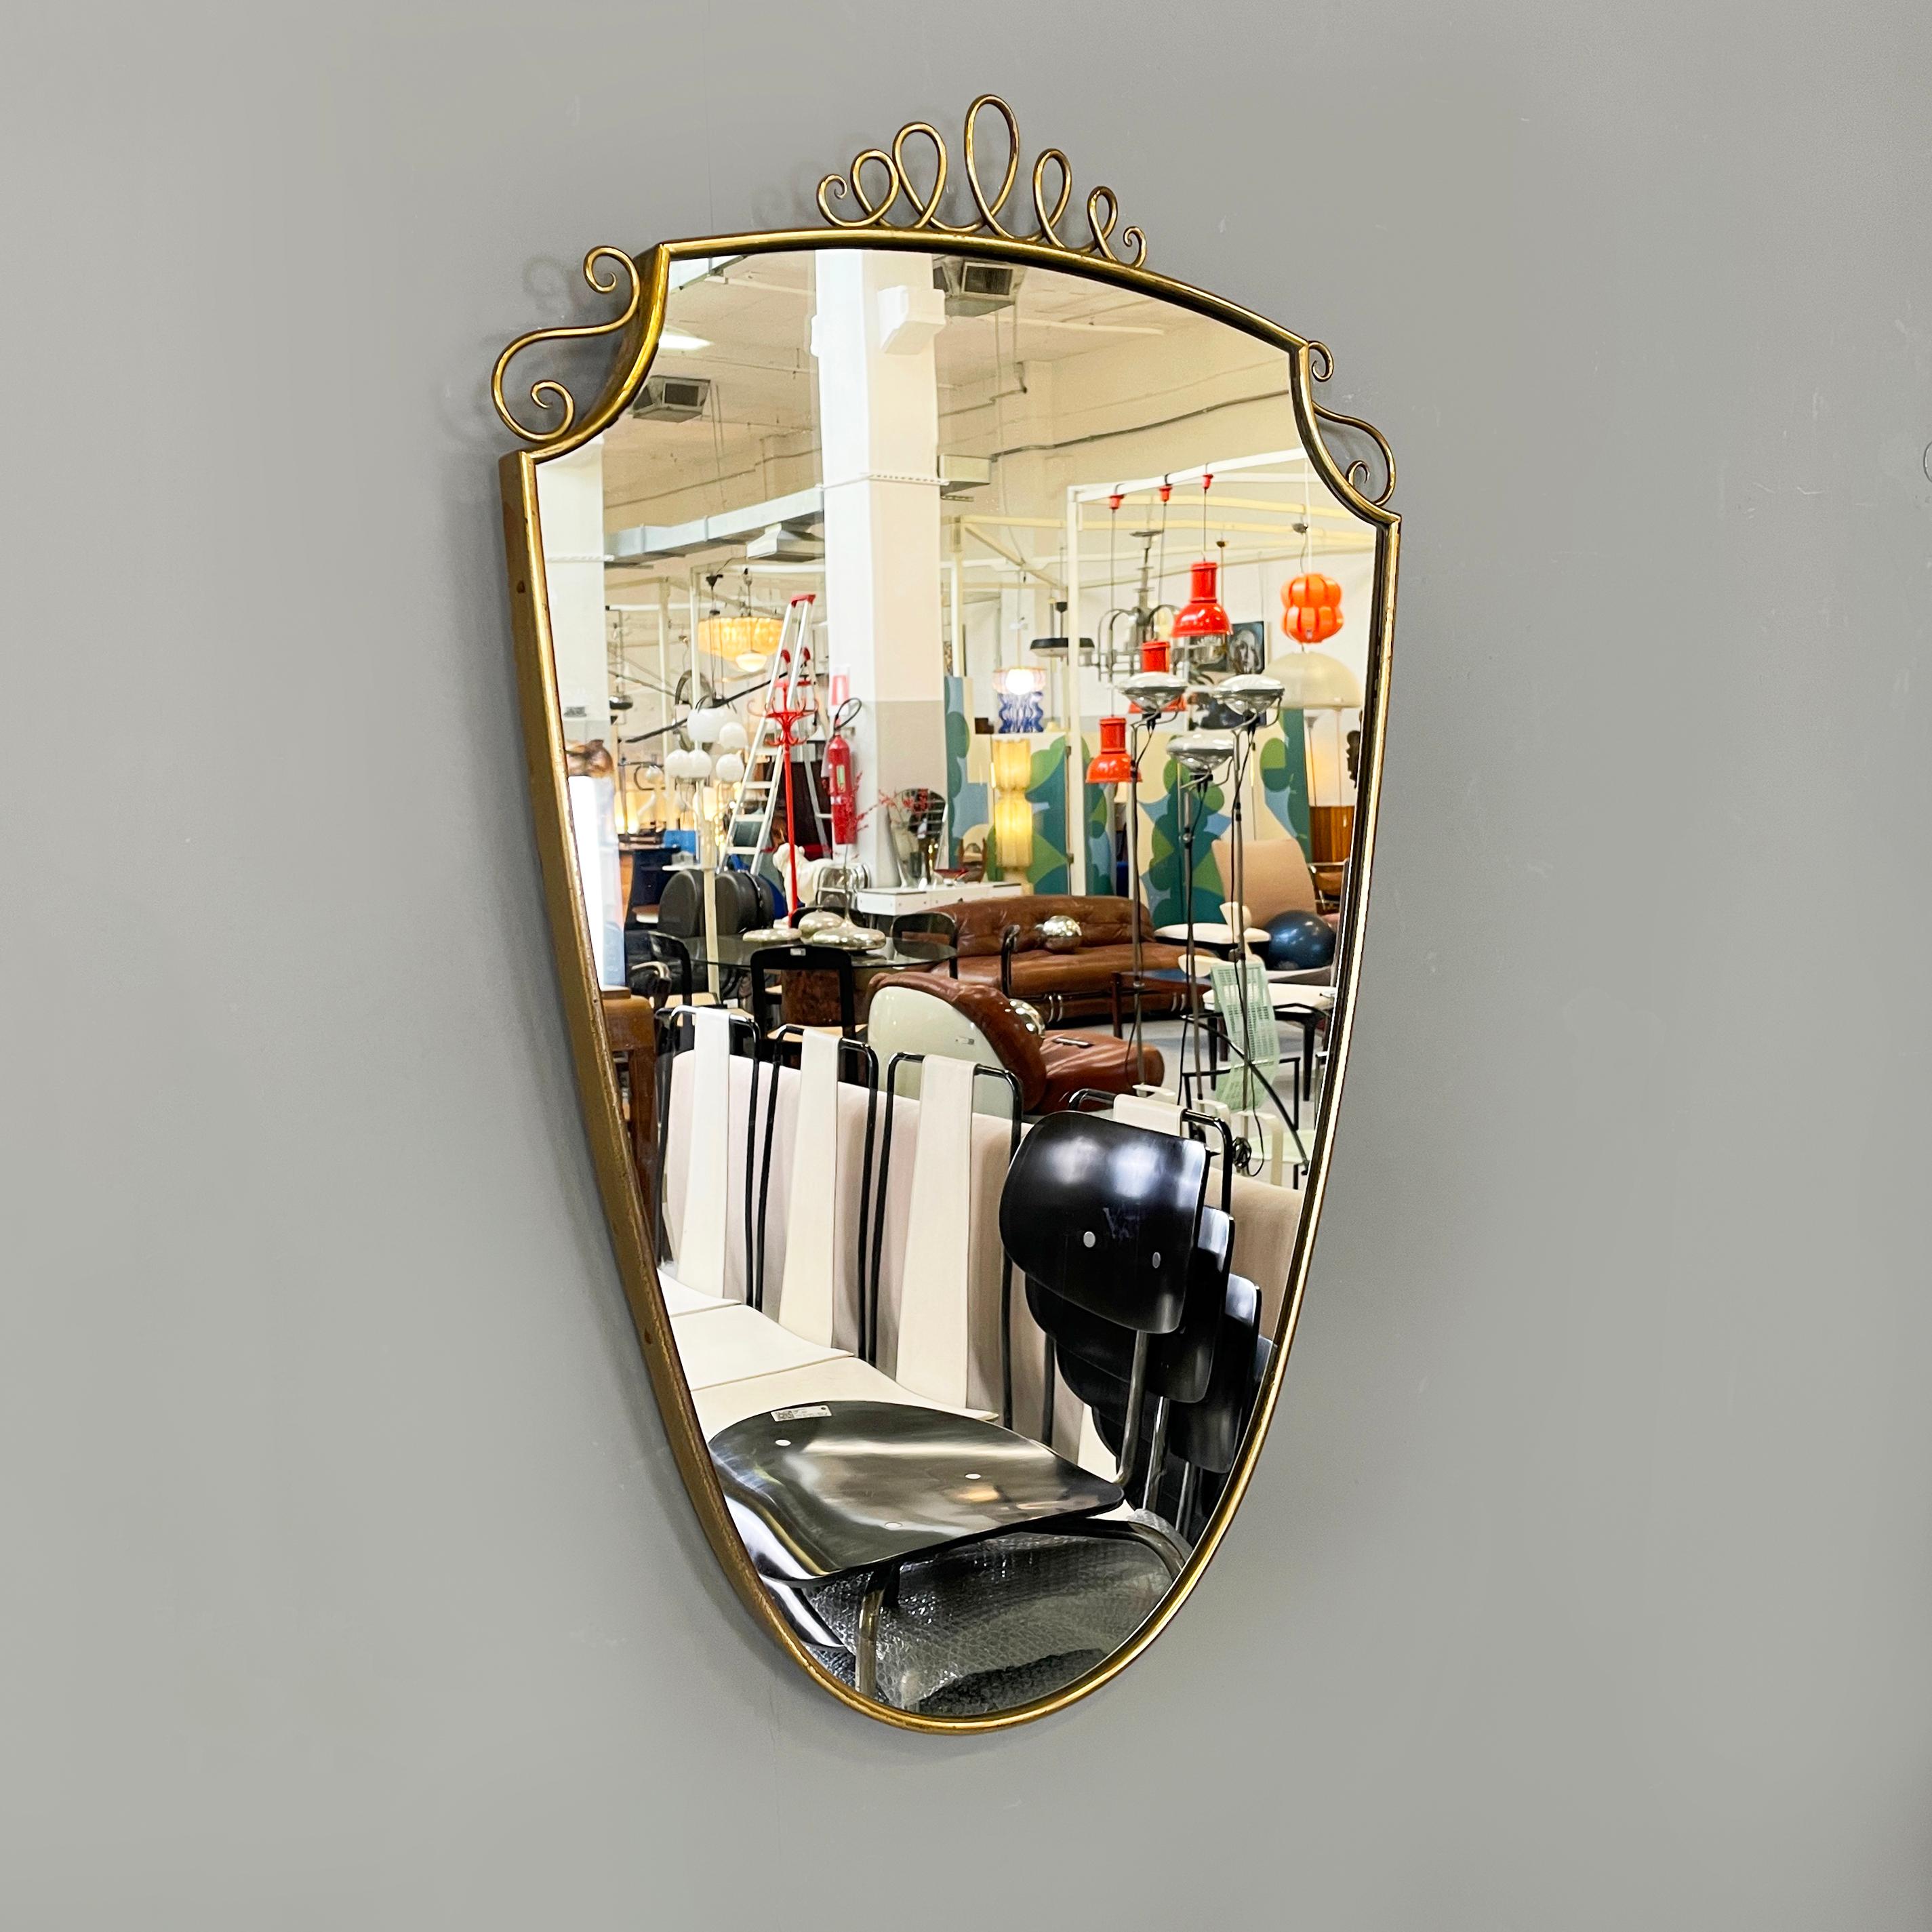 Italian mid-century modern Shield-shaped wall mirror with brass frame, 1950s
Shield-shaped wall mirror with brass frame. In the upper part it has two specular decorations on the corners and one in the center.
1950s
Good condition, shows signs of use